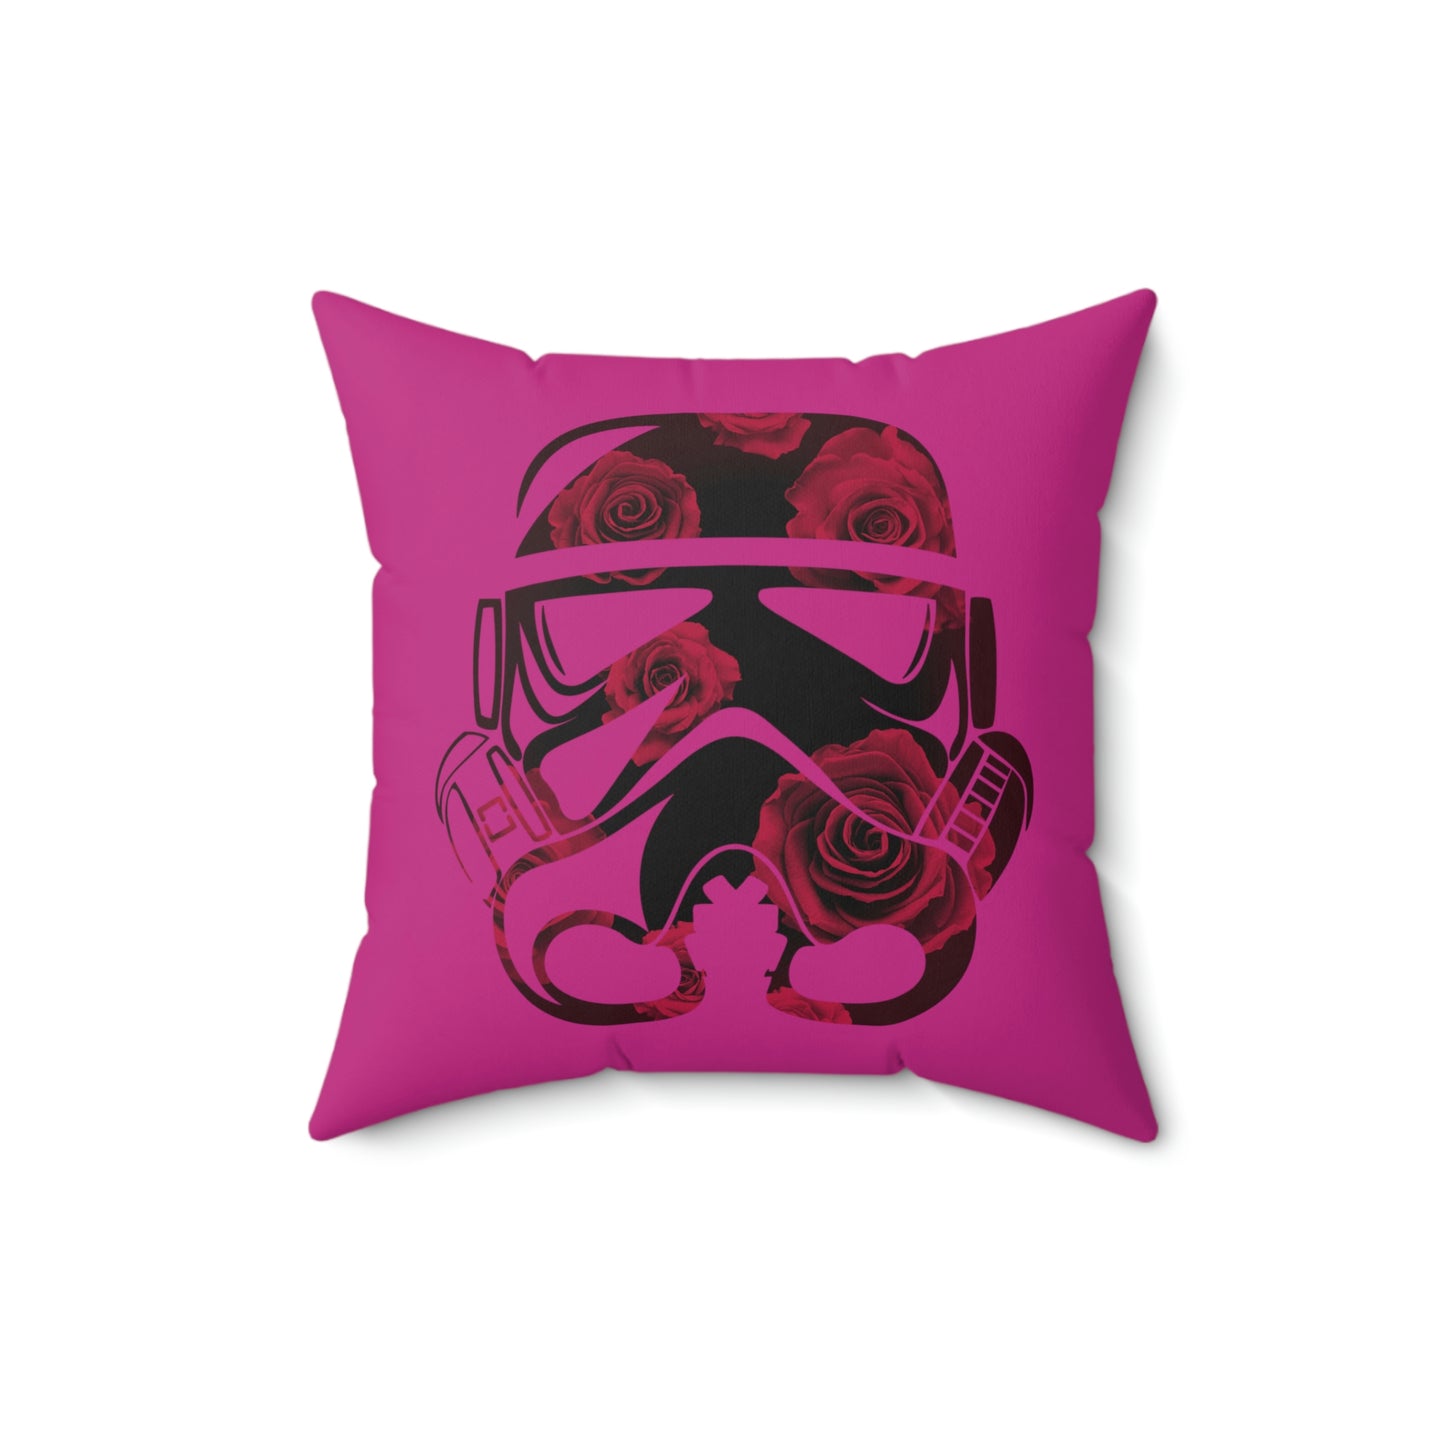 Spun Polyester Square Pillow Case ”Storm Trooper 15 on Pink”